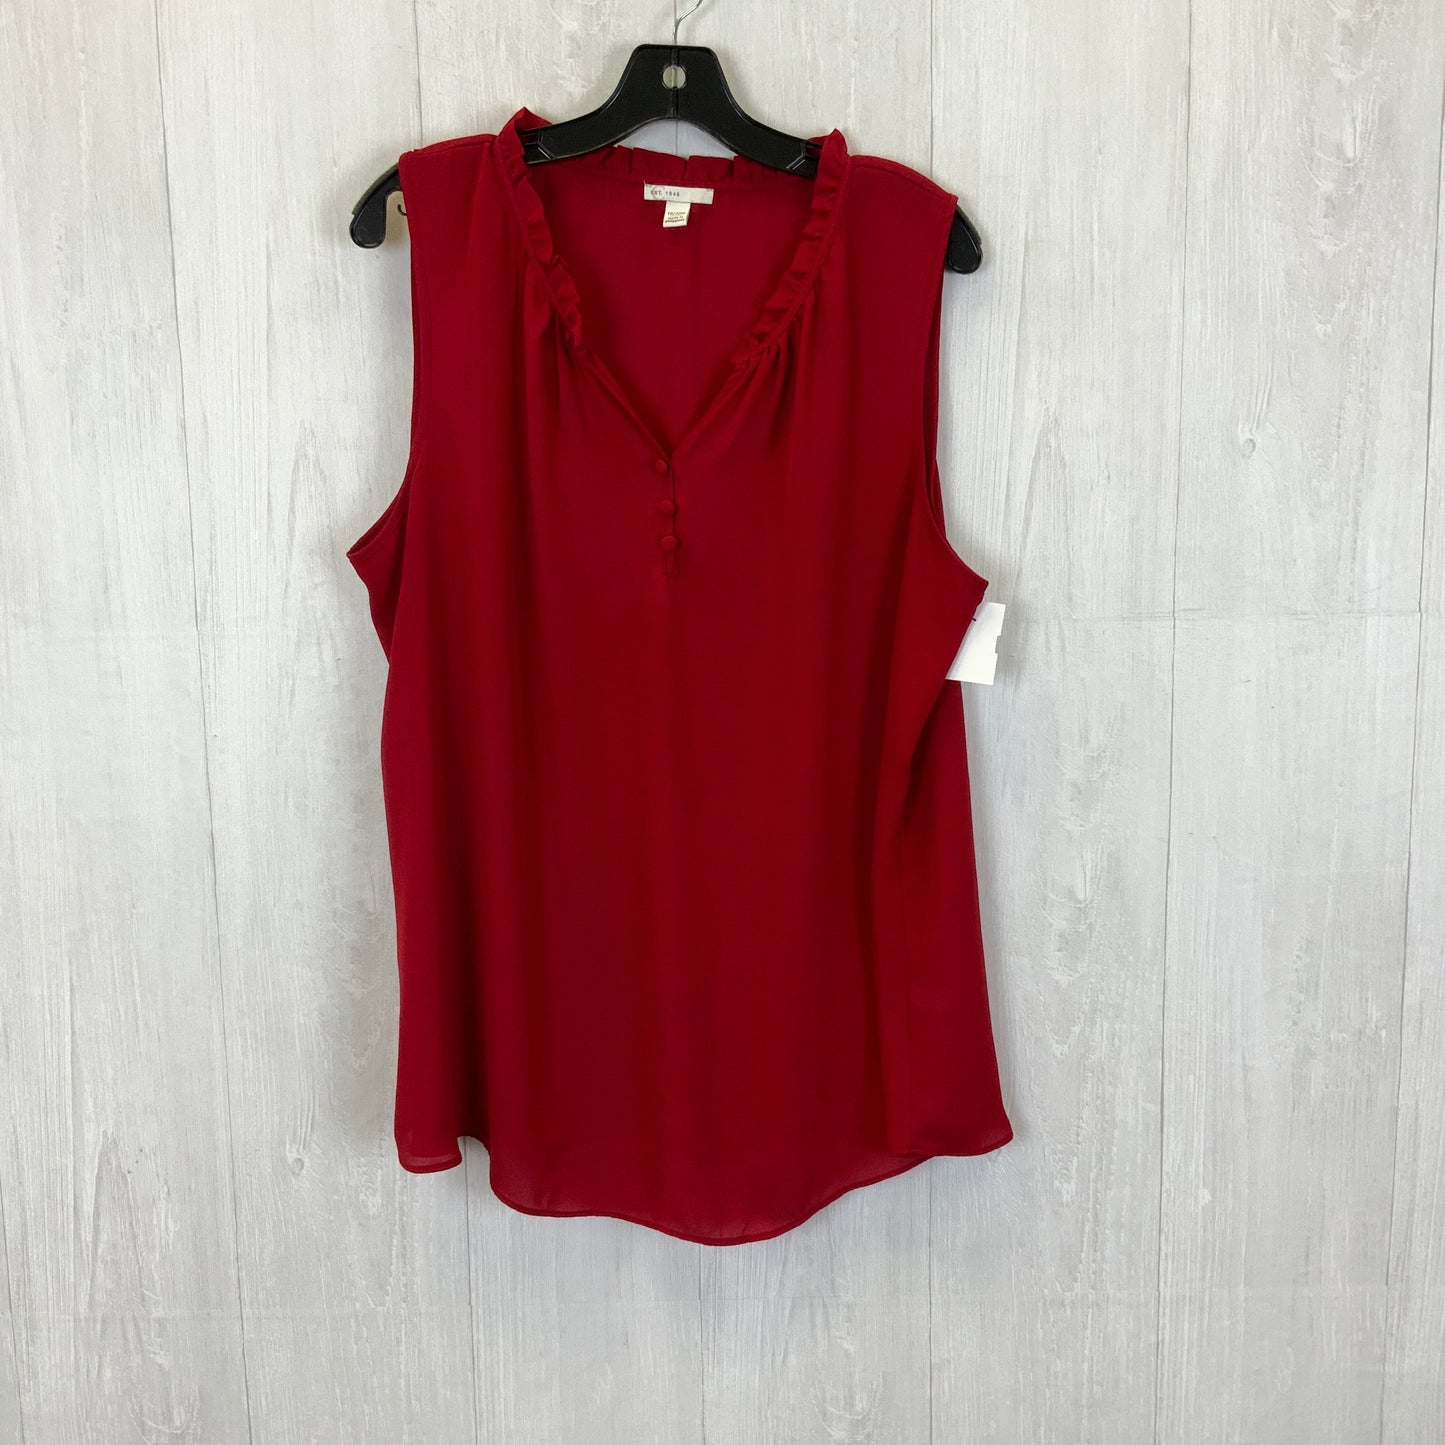 Red Top Sleeveless Cato, Size 2x